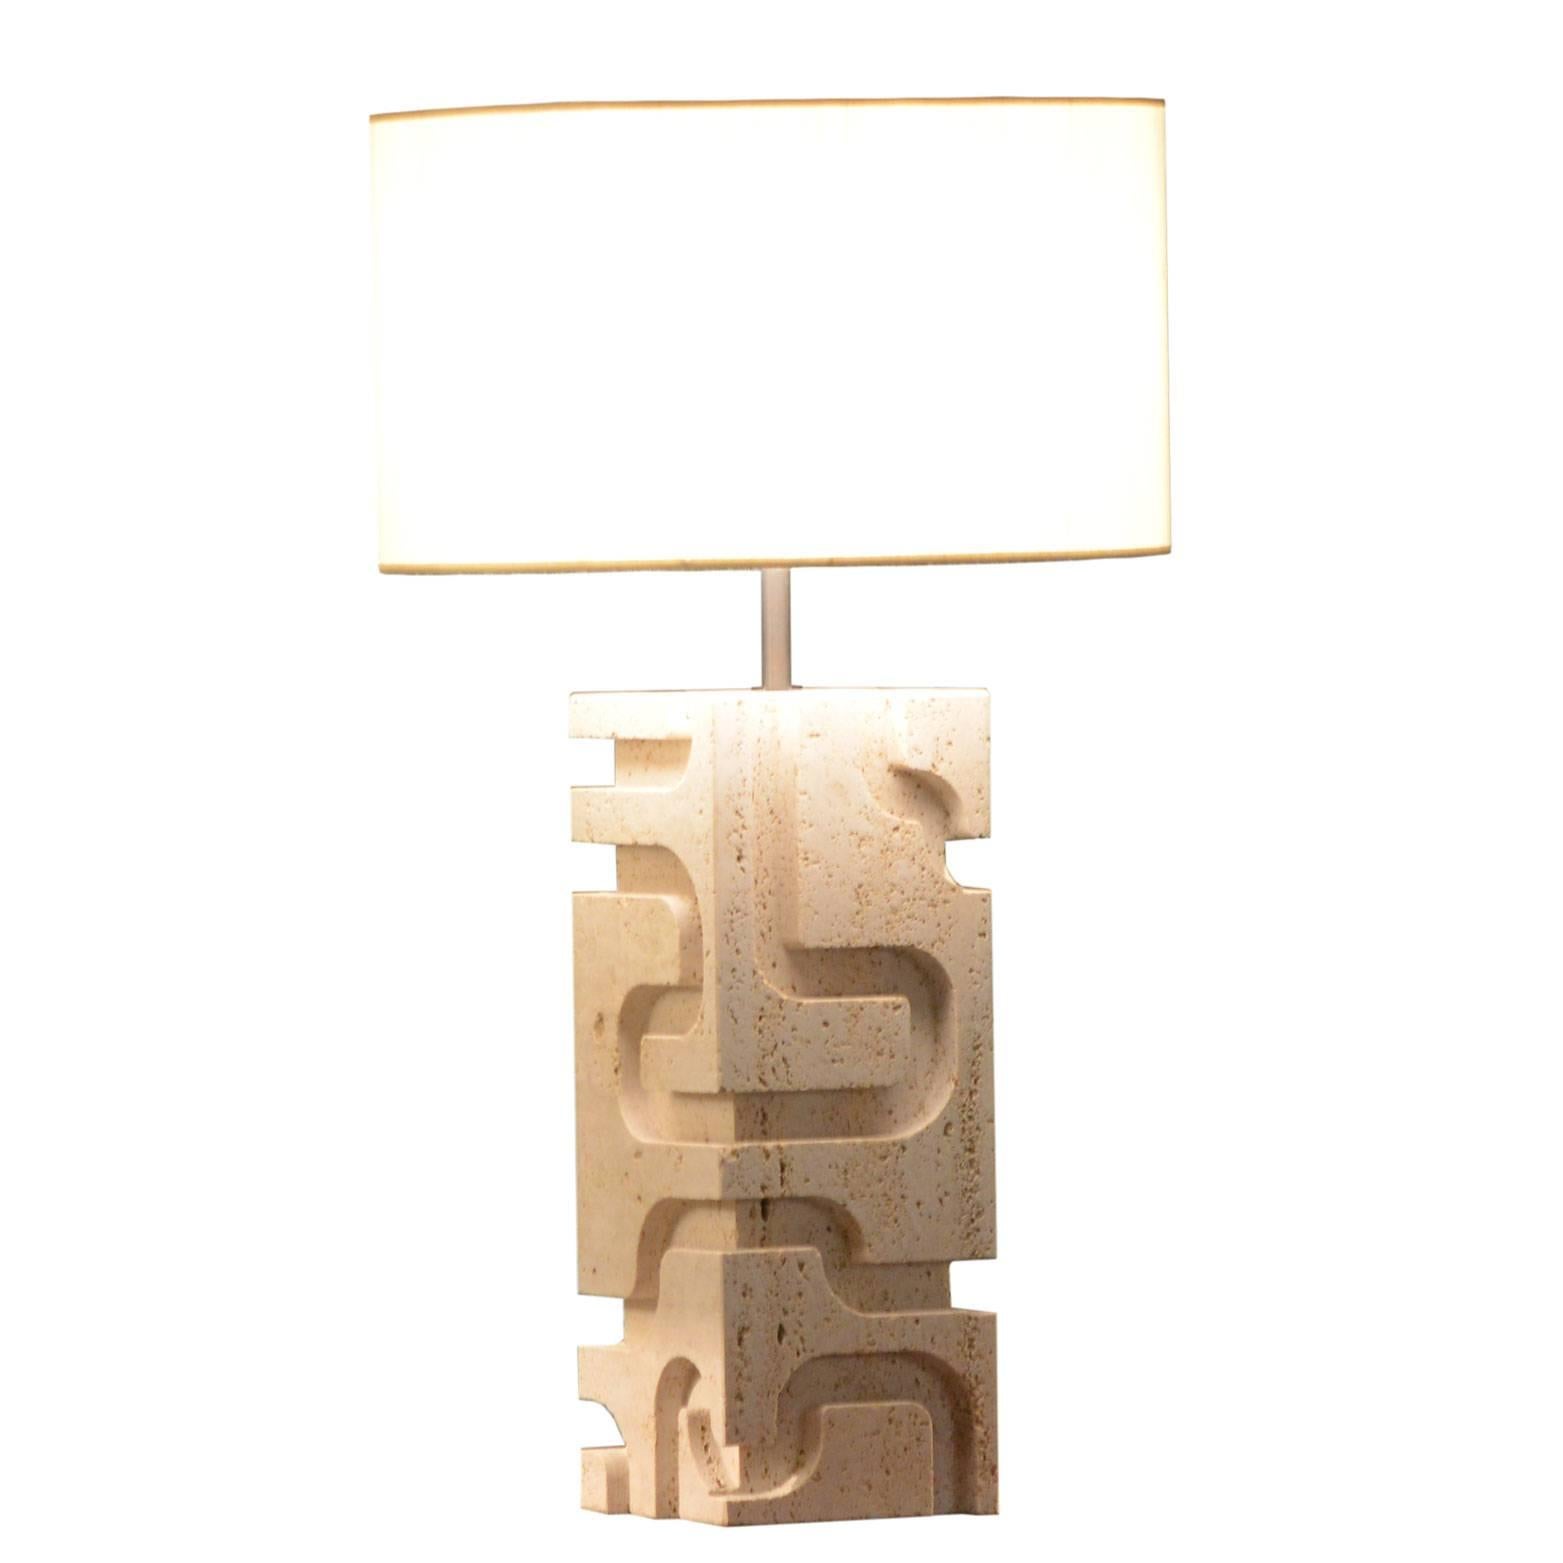 The lamps have been realized by our master artisans in whithe, open-pore travertine. The shades are in silk shantung. The diameter of each shade is cm 45.